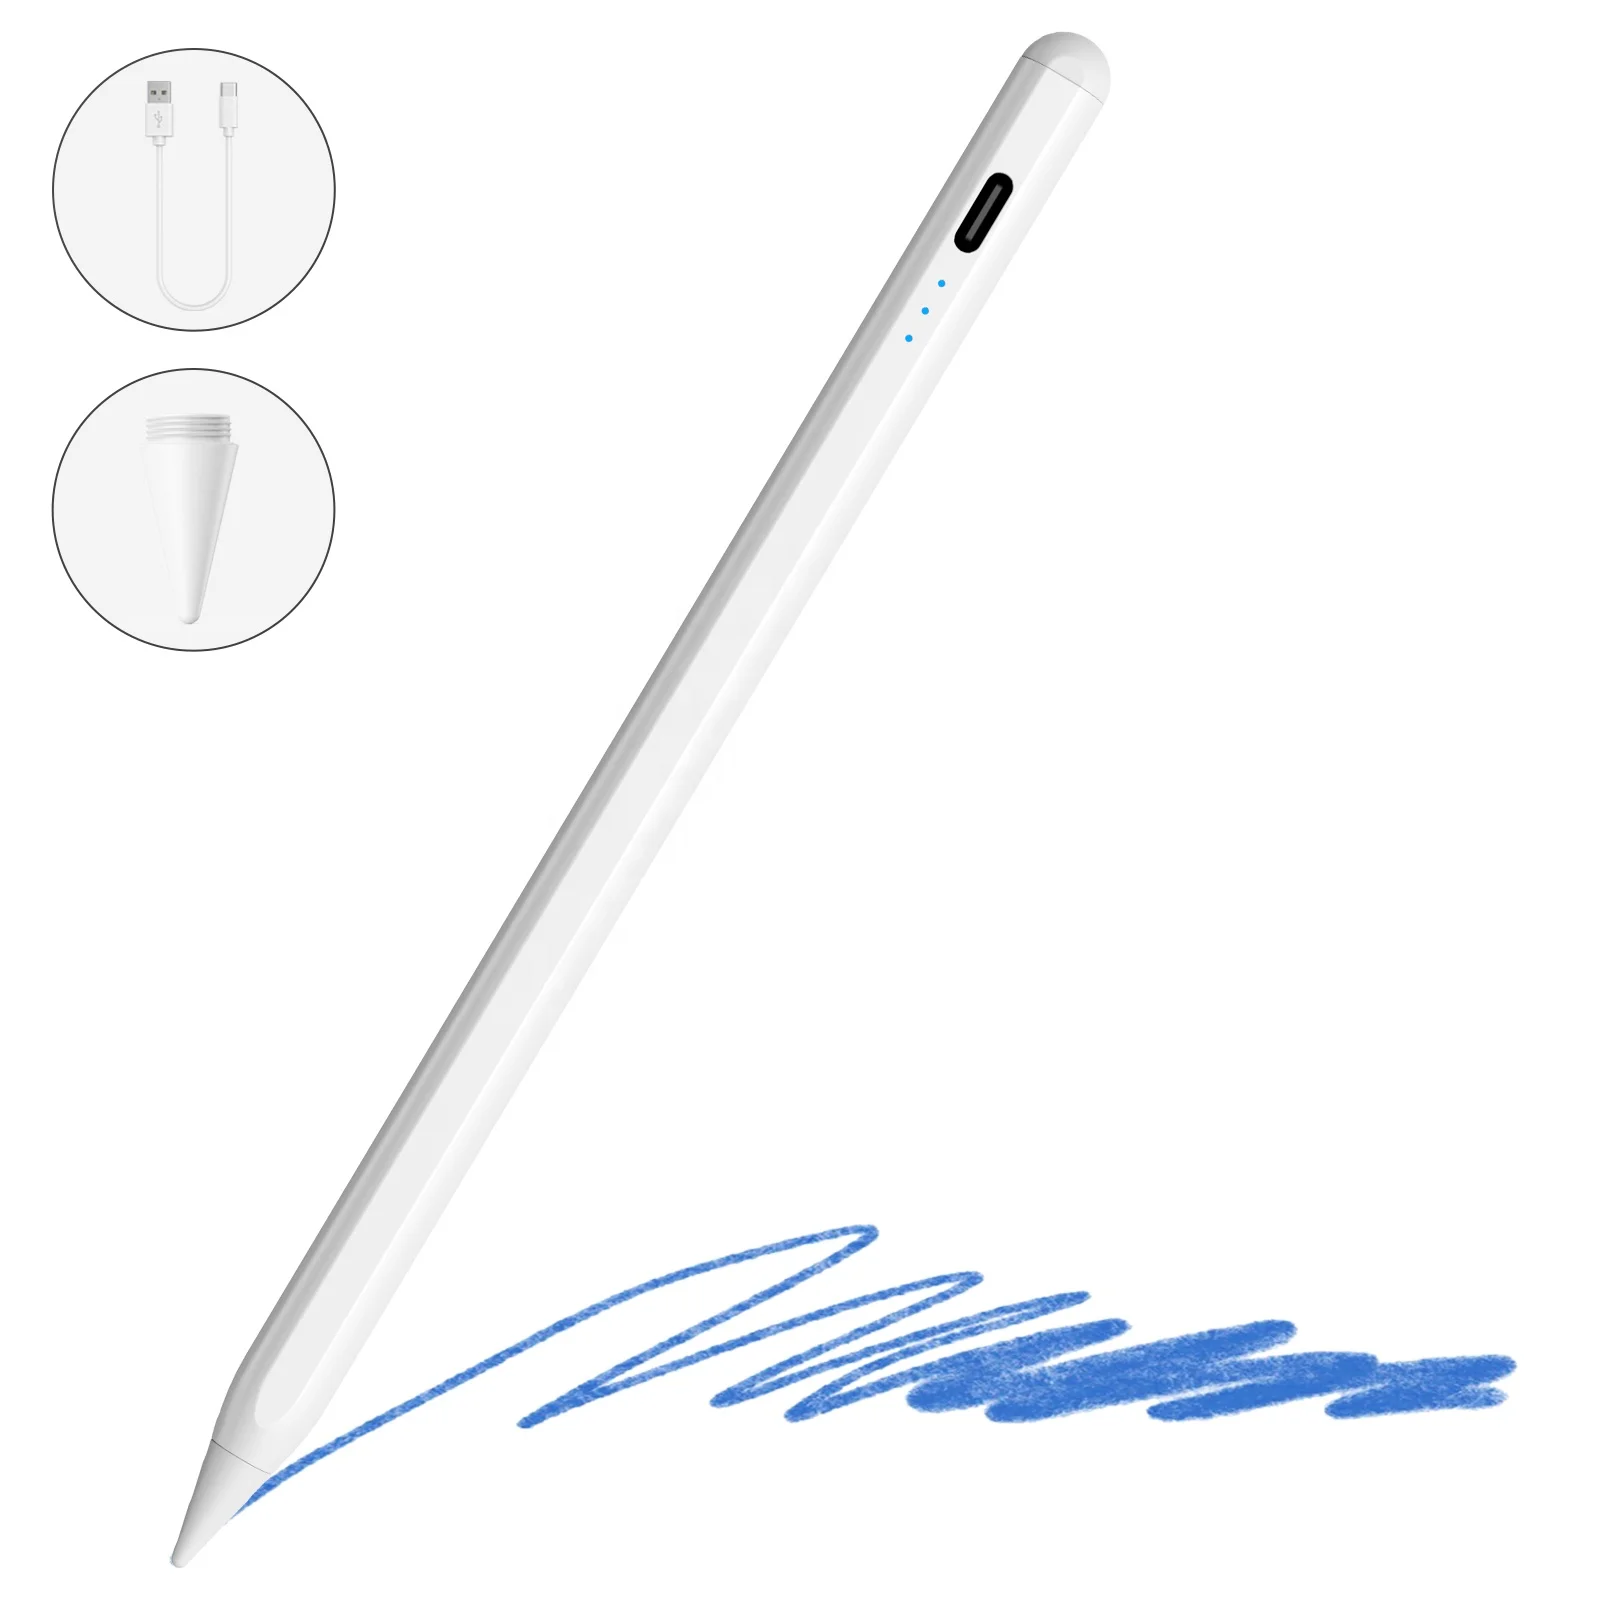 

wholesale 2nd generation drawing palm rejection active stylu pen for apple ipad pencil